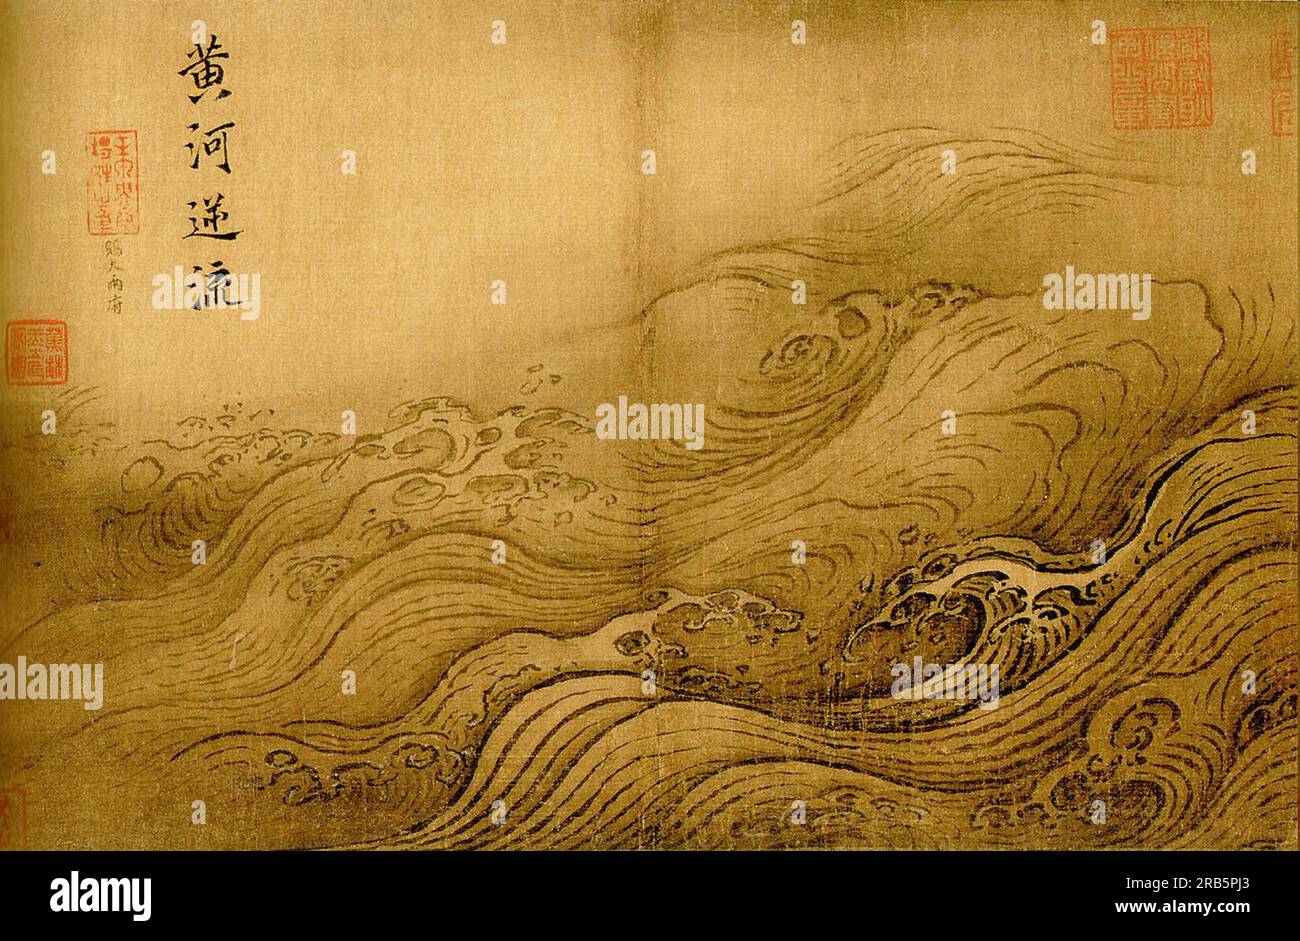 Water Album - The Yellow River Breaches its Course by Ma Yuan Stock Photo